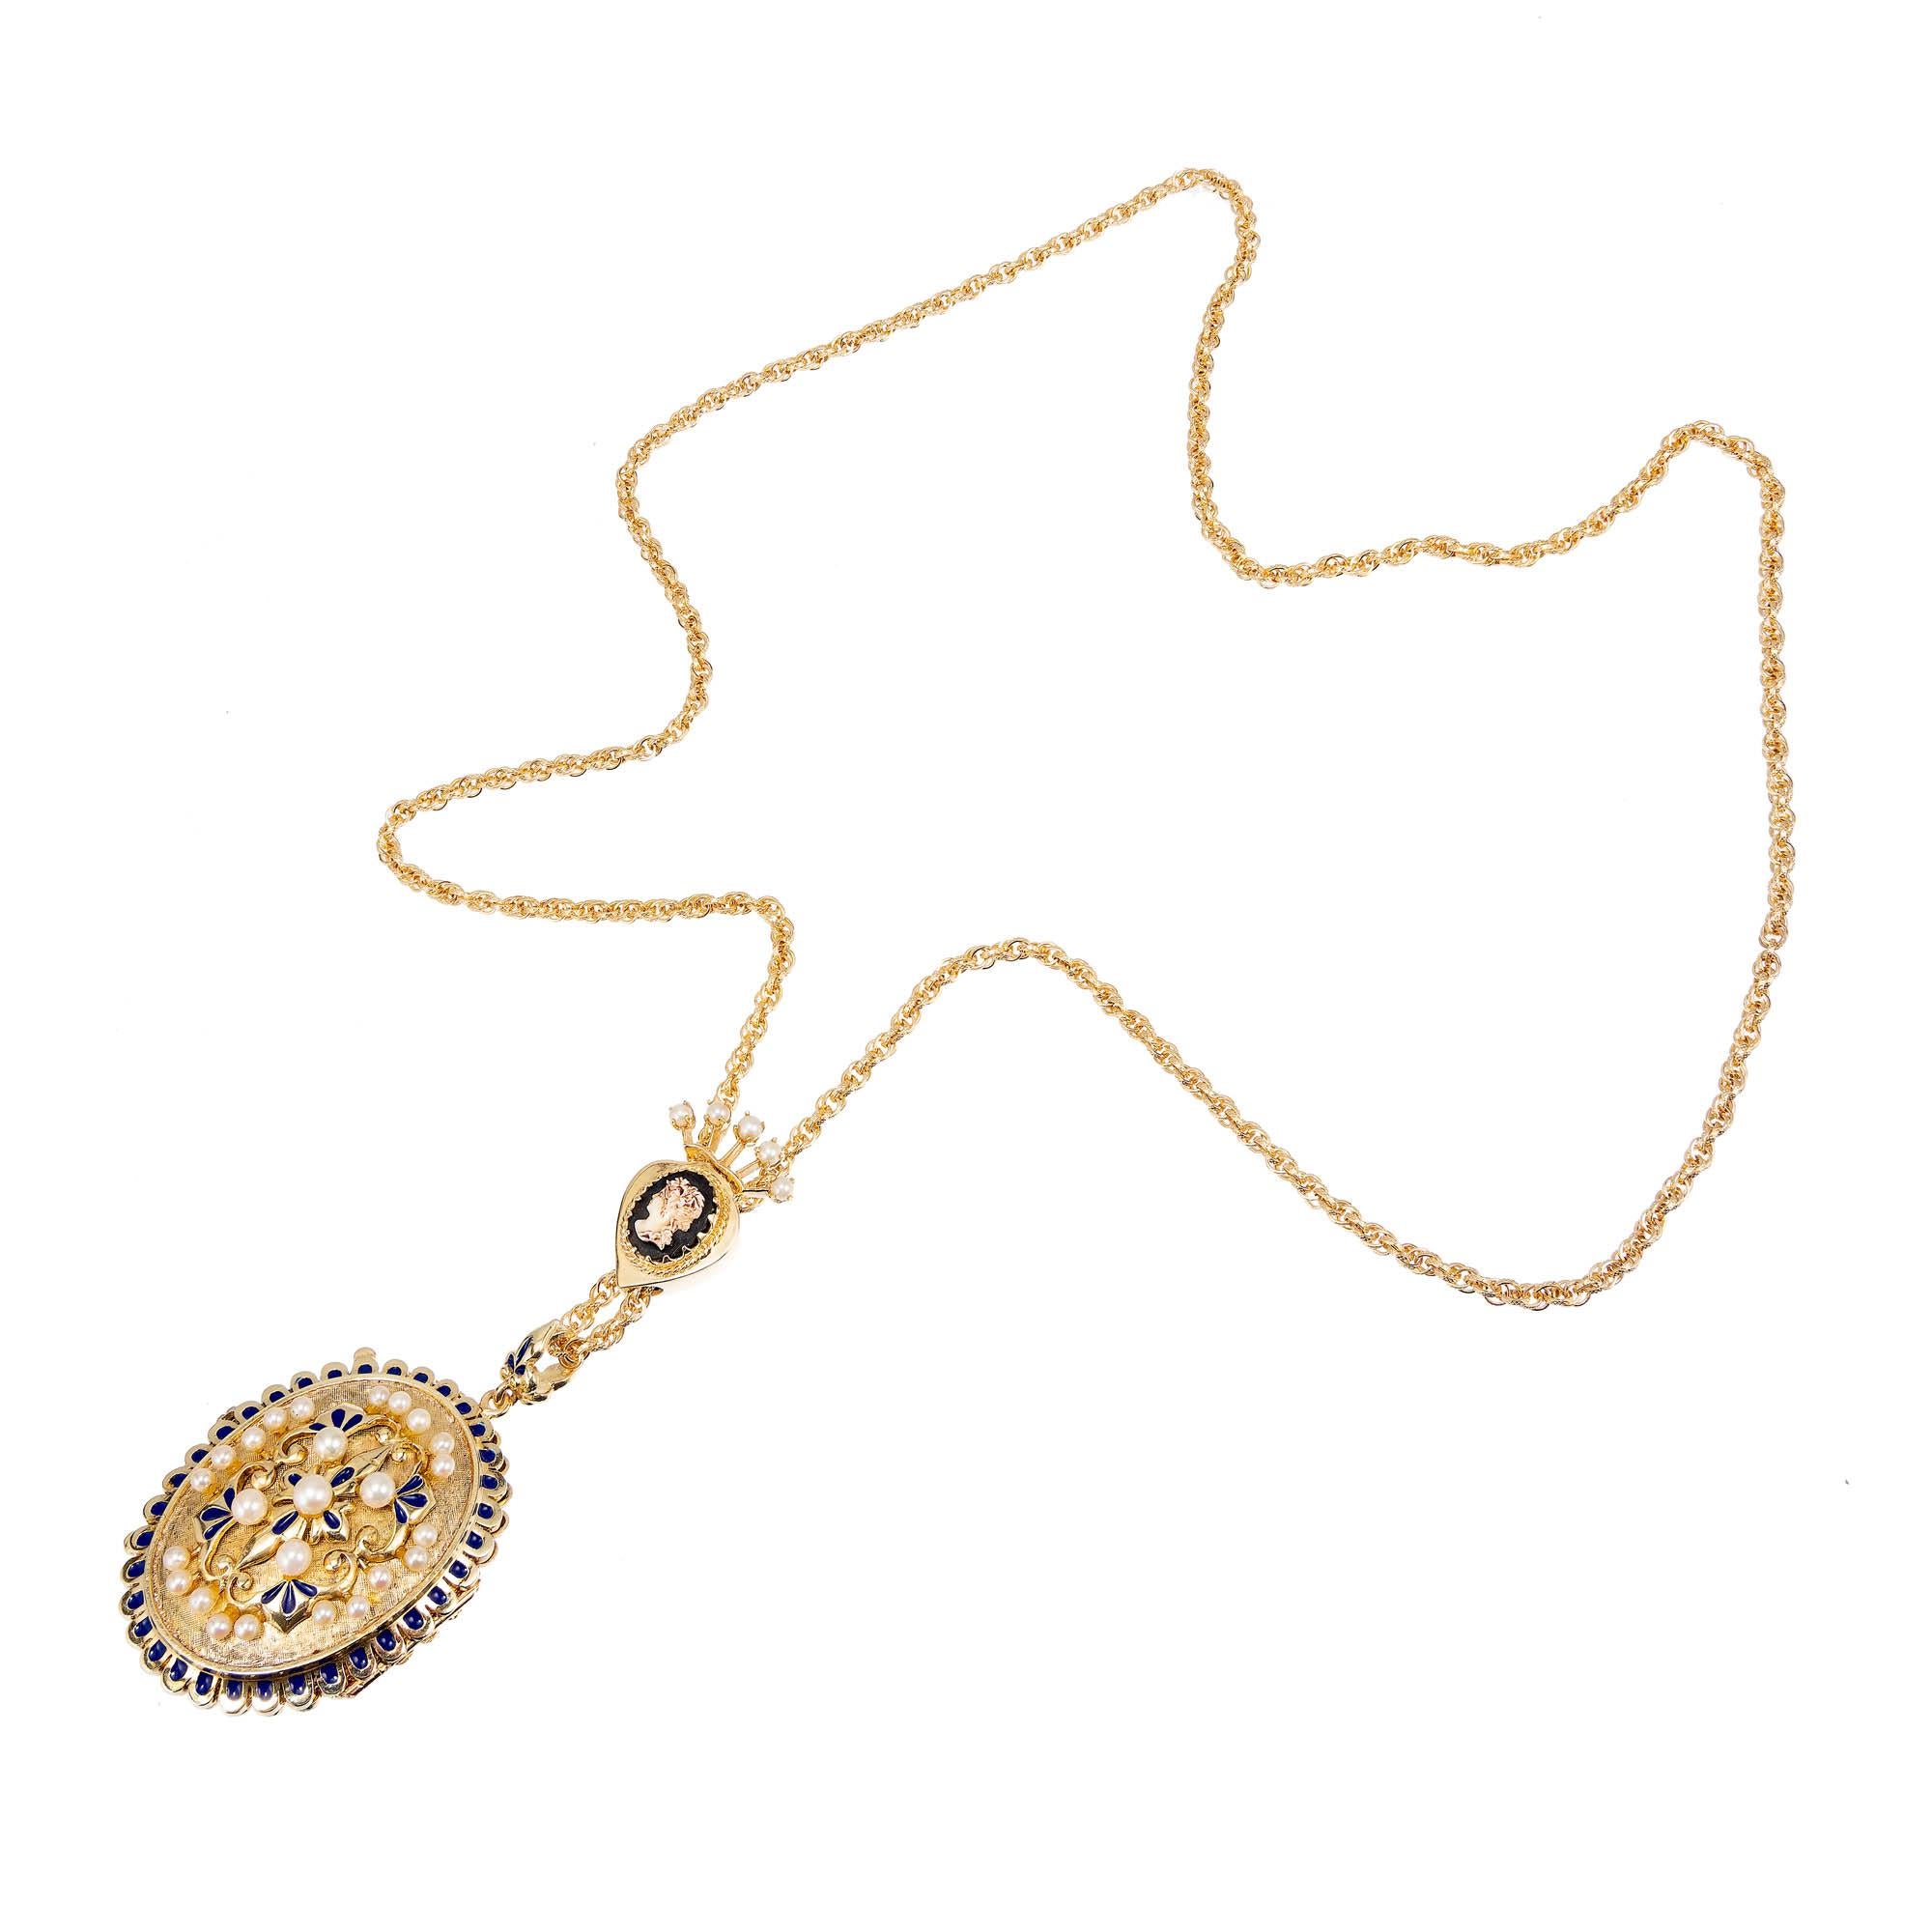 Original 1950’s pearl and enamel 14k yellow gold ornate locket necklace. Blue enamel and cultured Pearls on both sides, on a textured rope chain with a hardstone Cameo slide in the middle. 

1 Cameo 
2 Japanese cultured Pearls, 4.2mm 
8 cultured